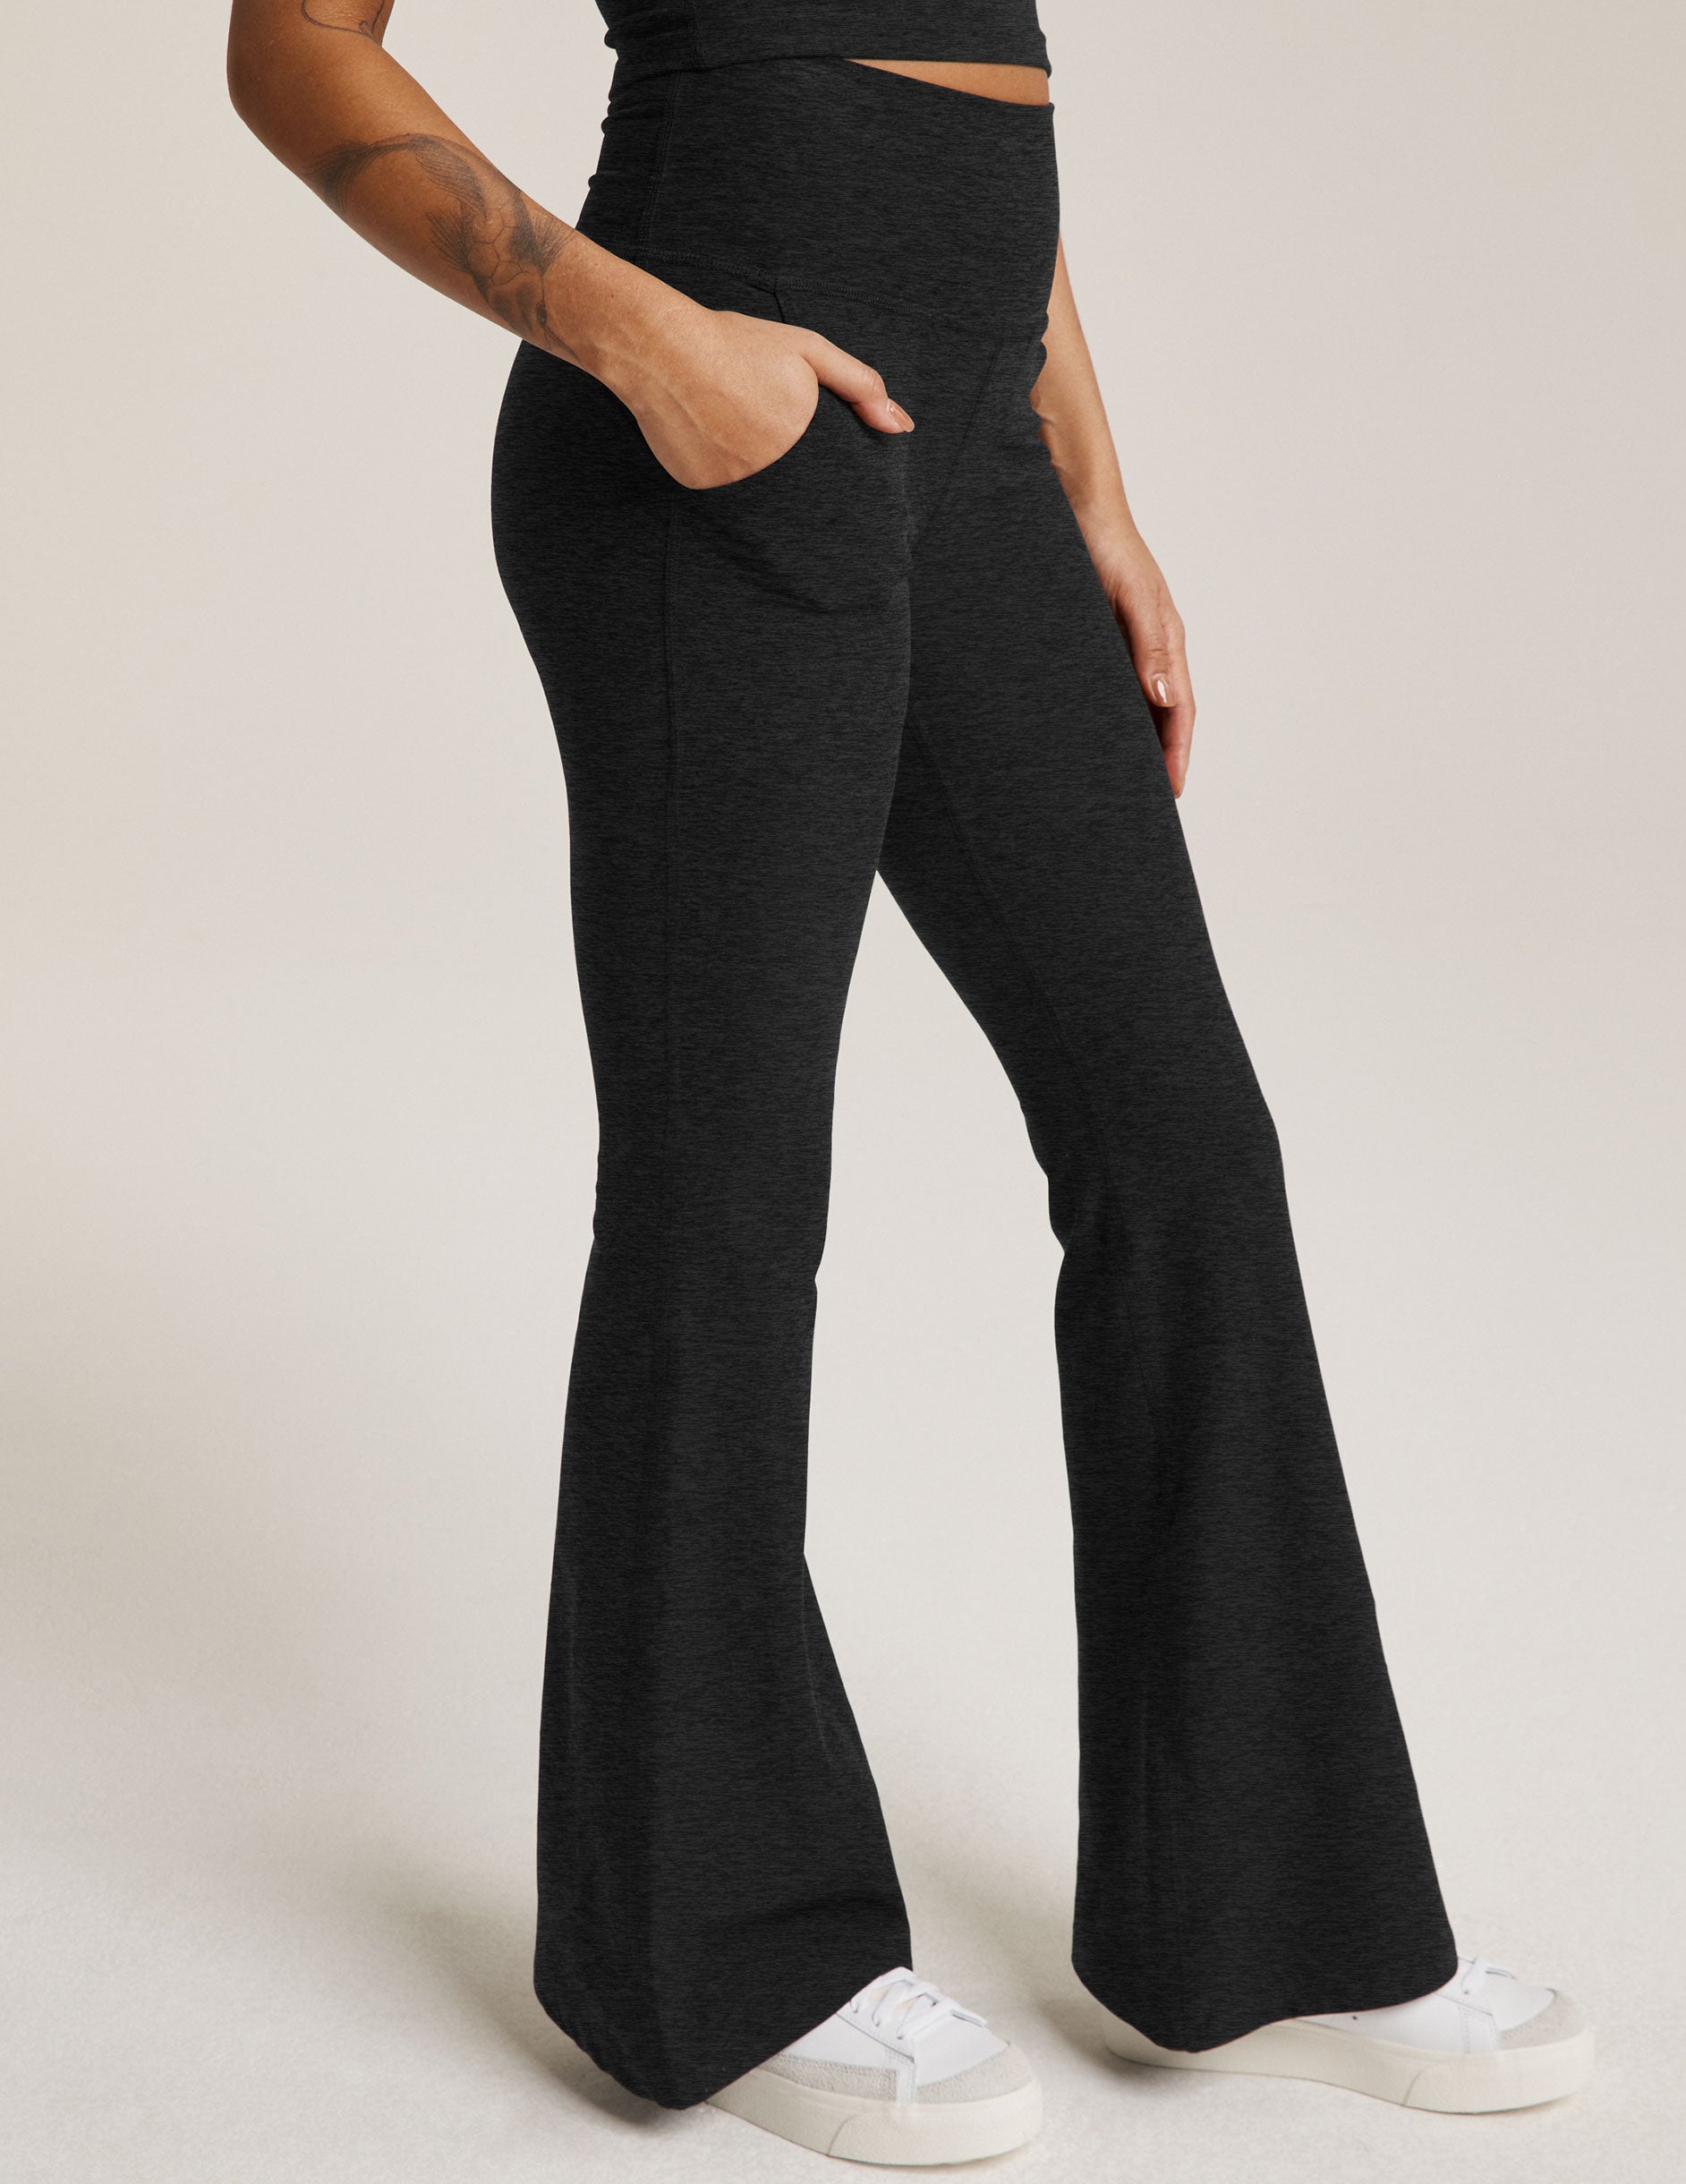 Women's High Rise Extra Stretch Square Pocket Palazzo Flare Jeans